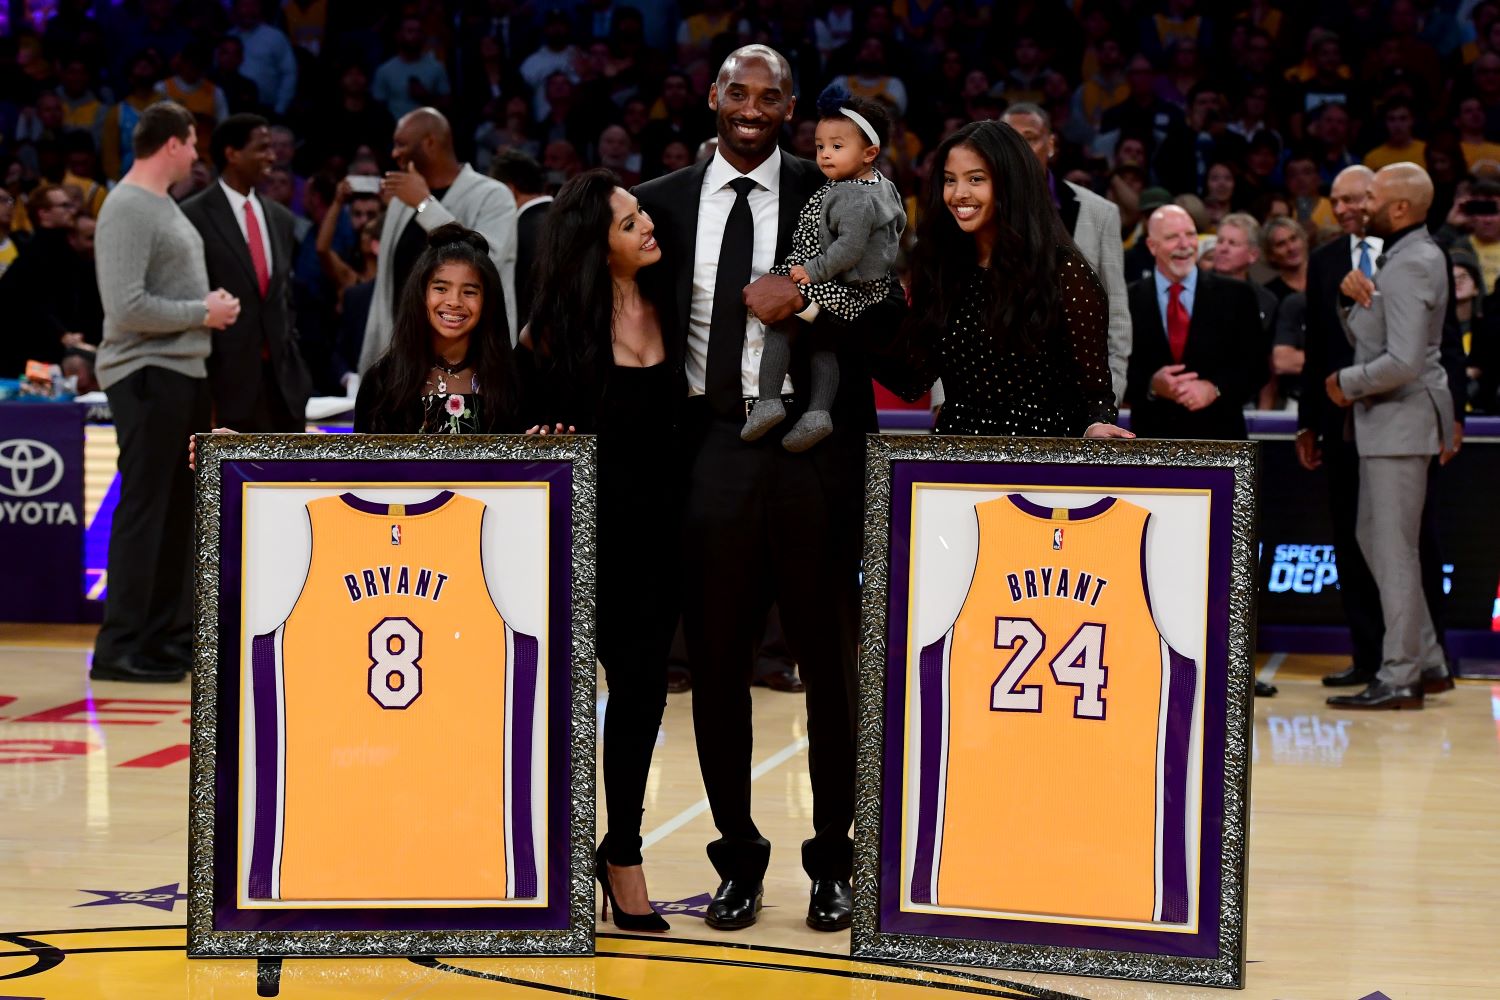 Vanessa Bryant paid homage to her late husband Kobe Bryant on Friday by posting a heartfelt message honoring the three-year anniversary of his jersey retirement.